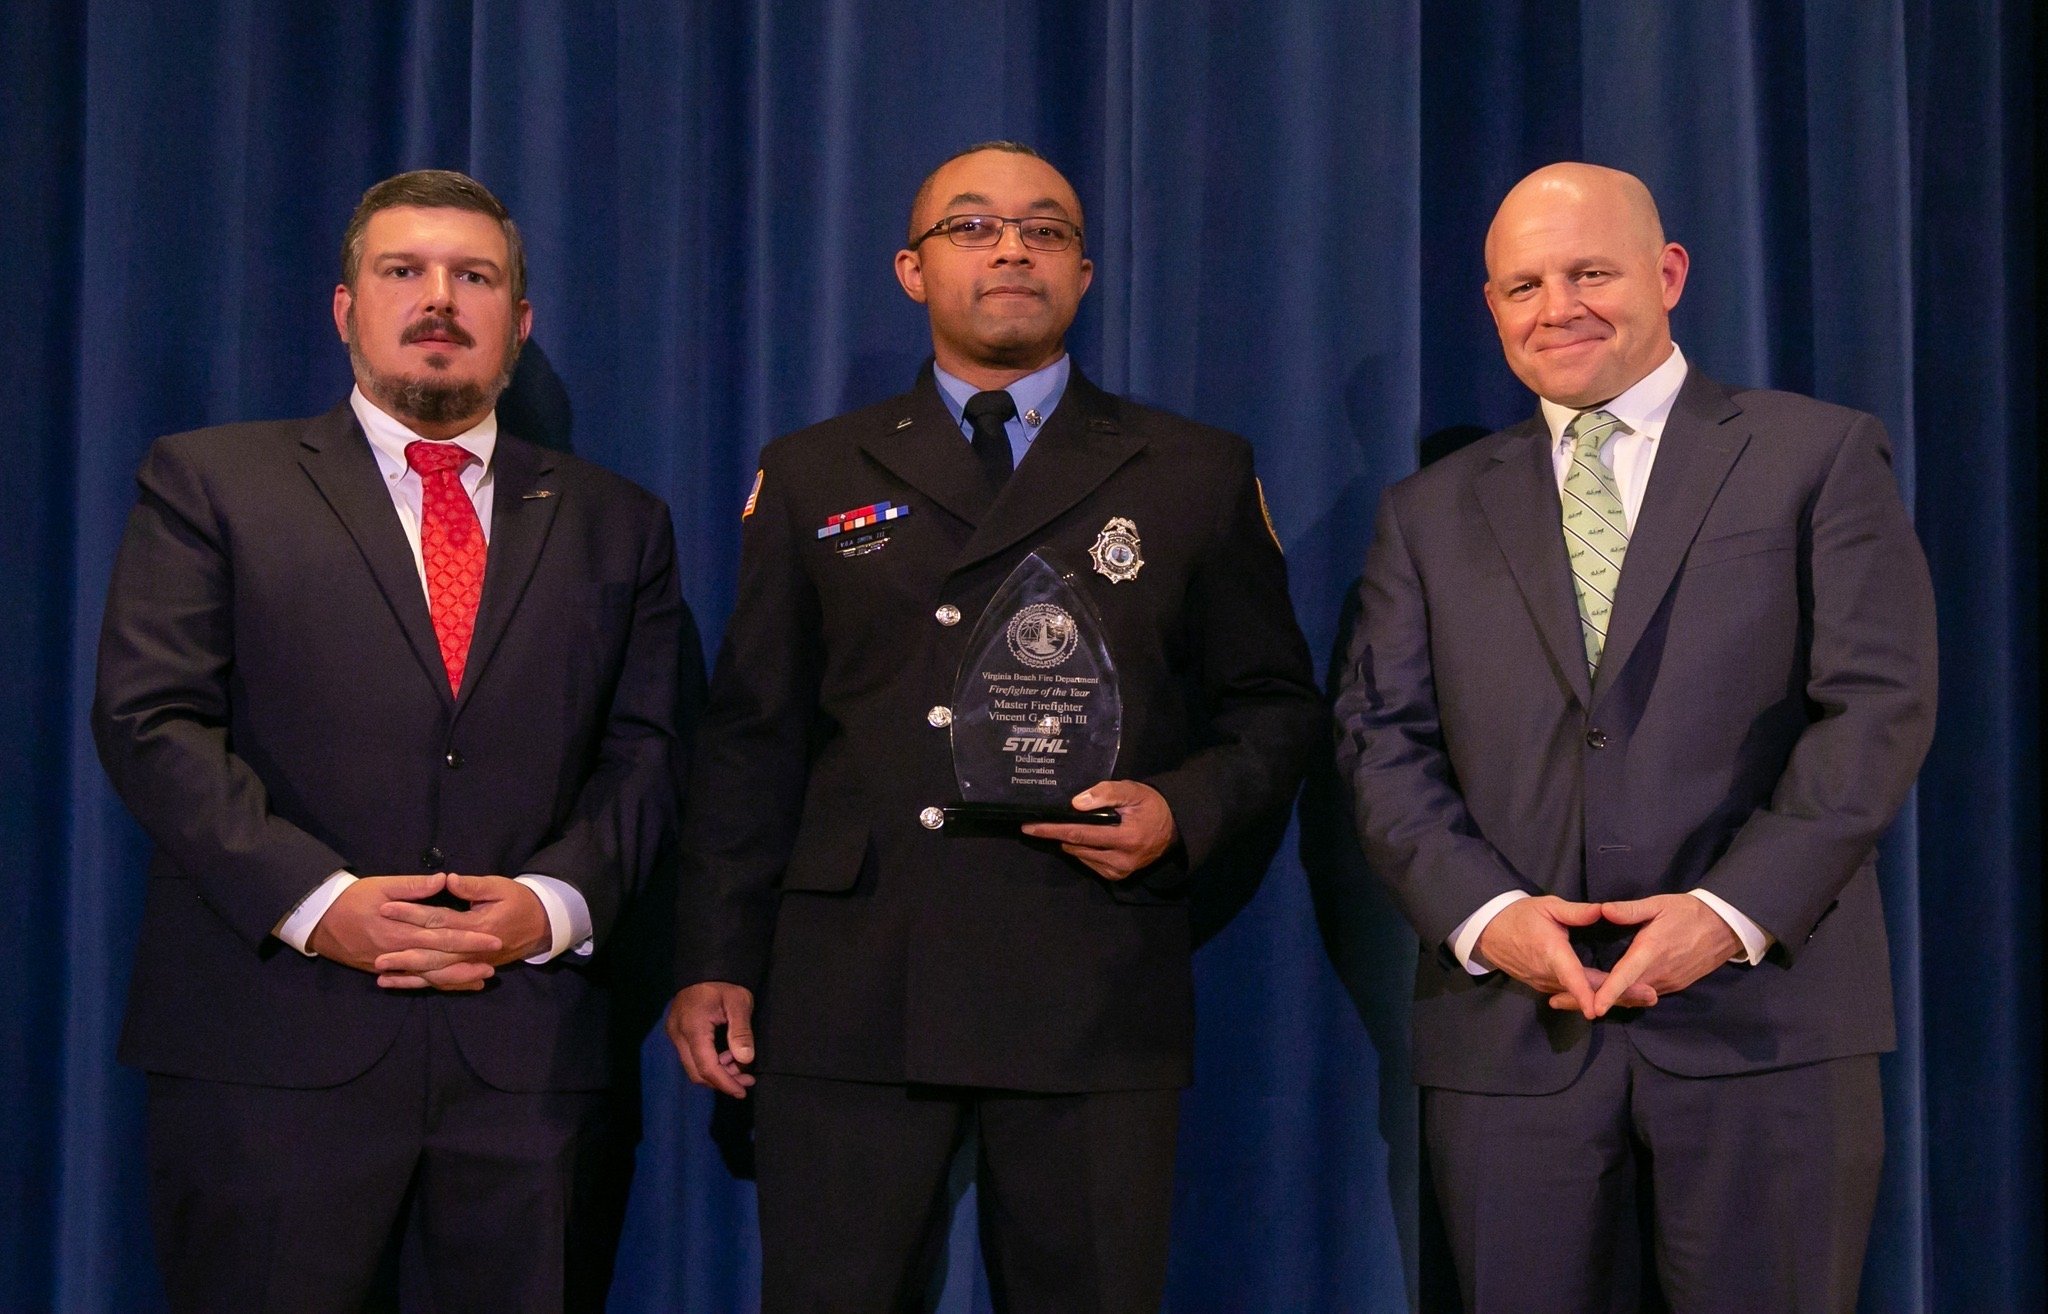 VIRGINIA BEACH FIRE DEPARTMENT AWARDS 2022 FIREFIGHTER OF THE YEAR TO VINCENT G SMITH III